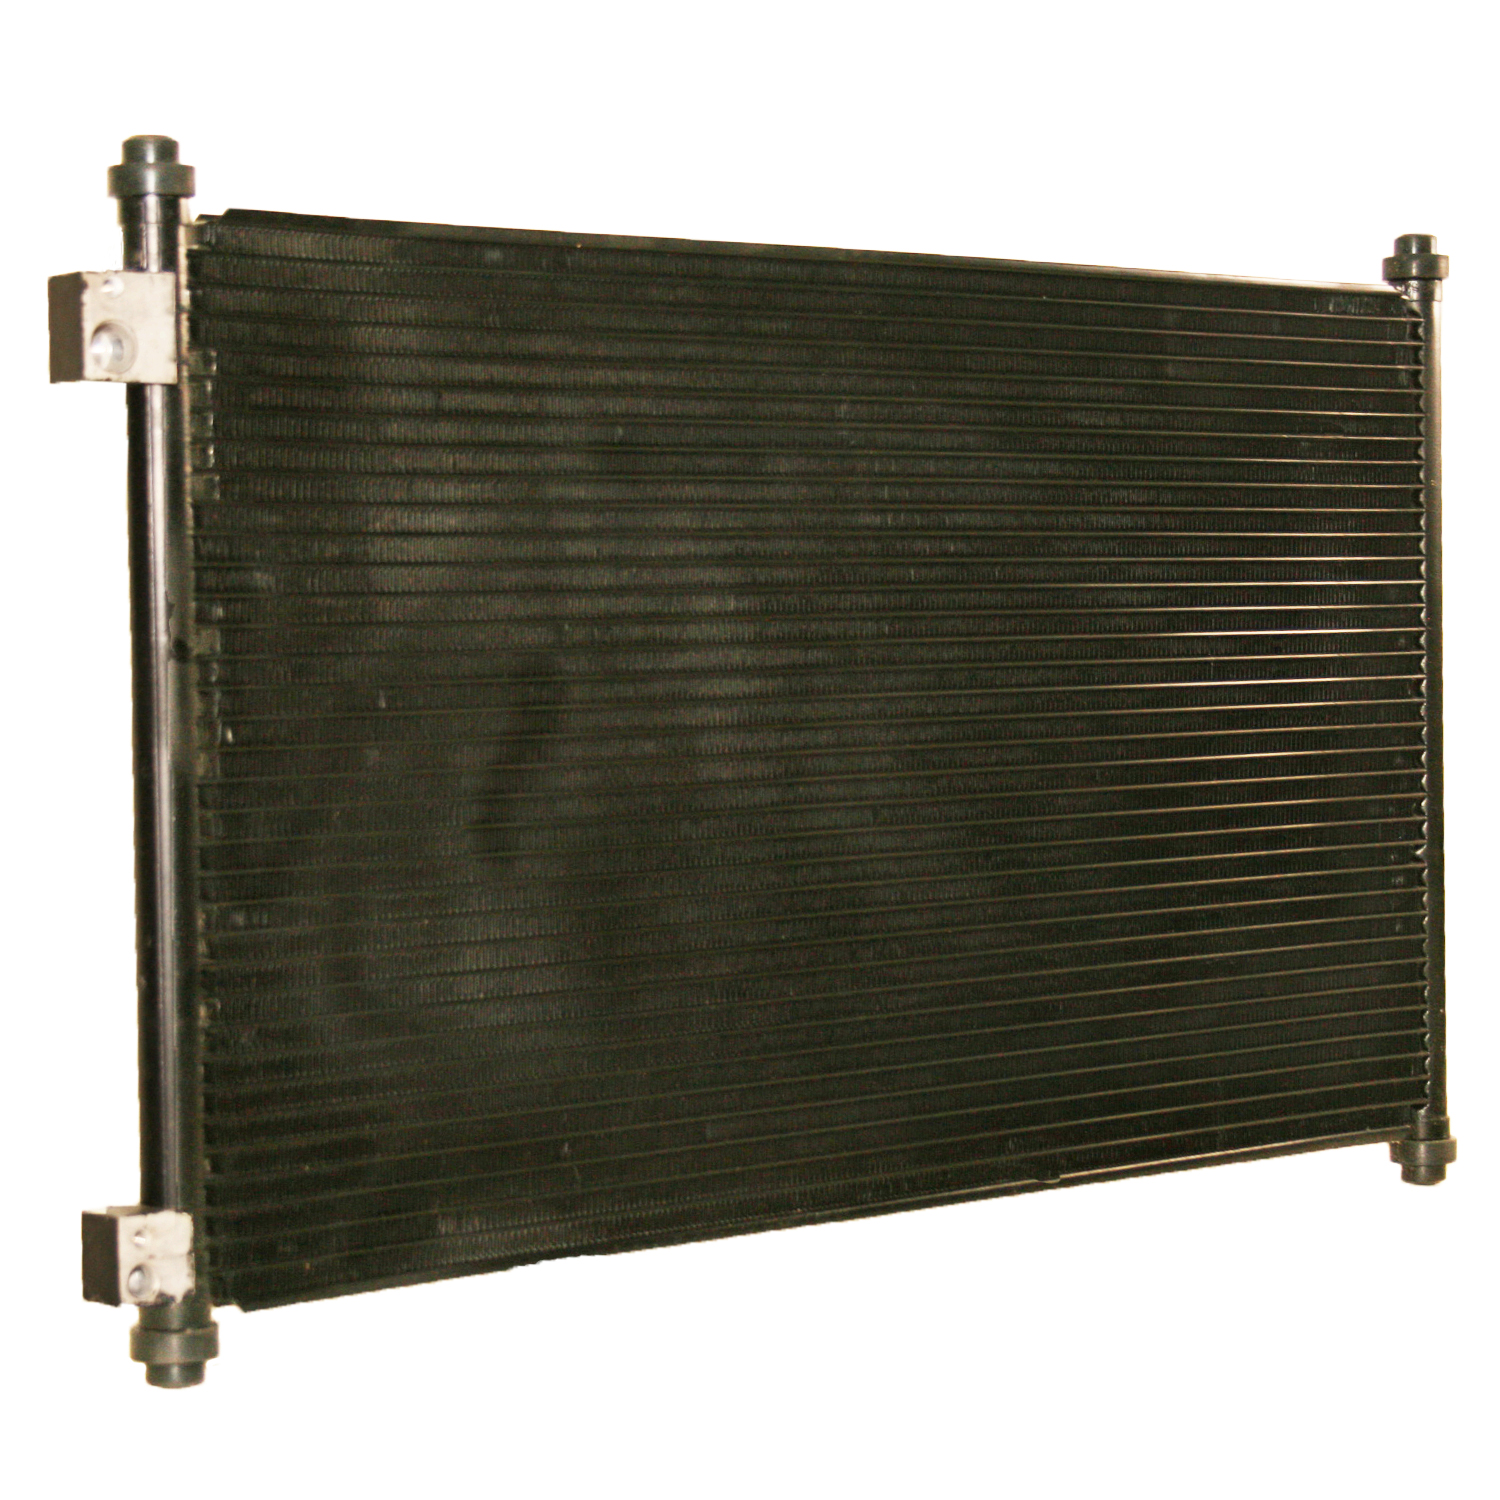 TCW Condenser 44-4898 New Product Image field_60b6a13a6e67c